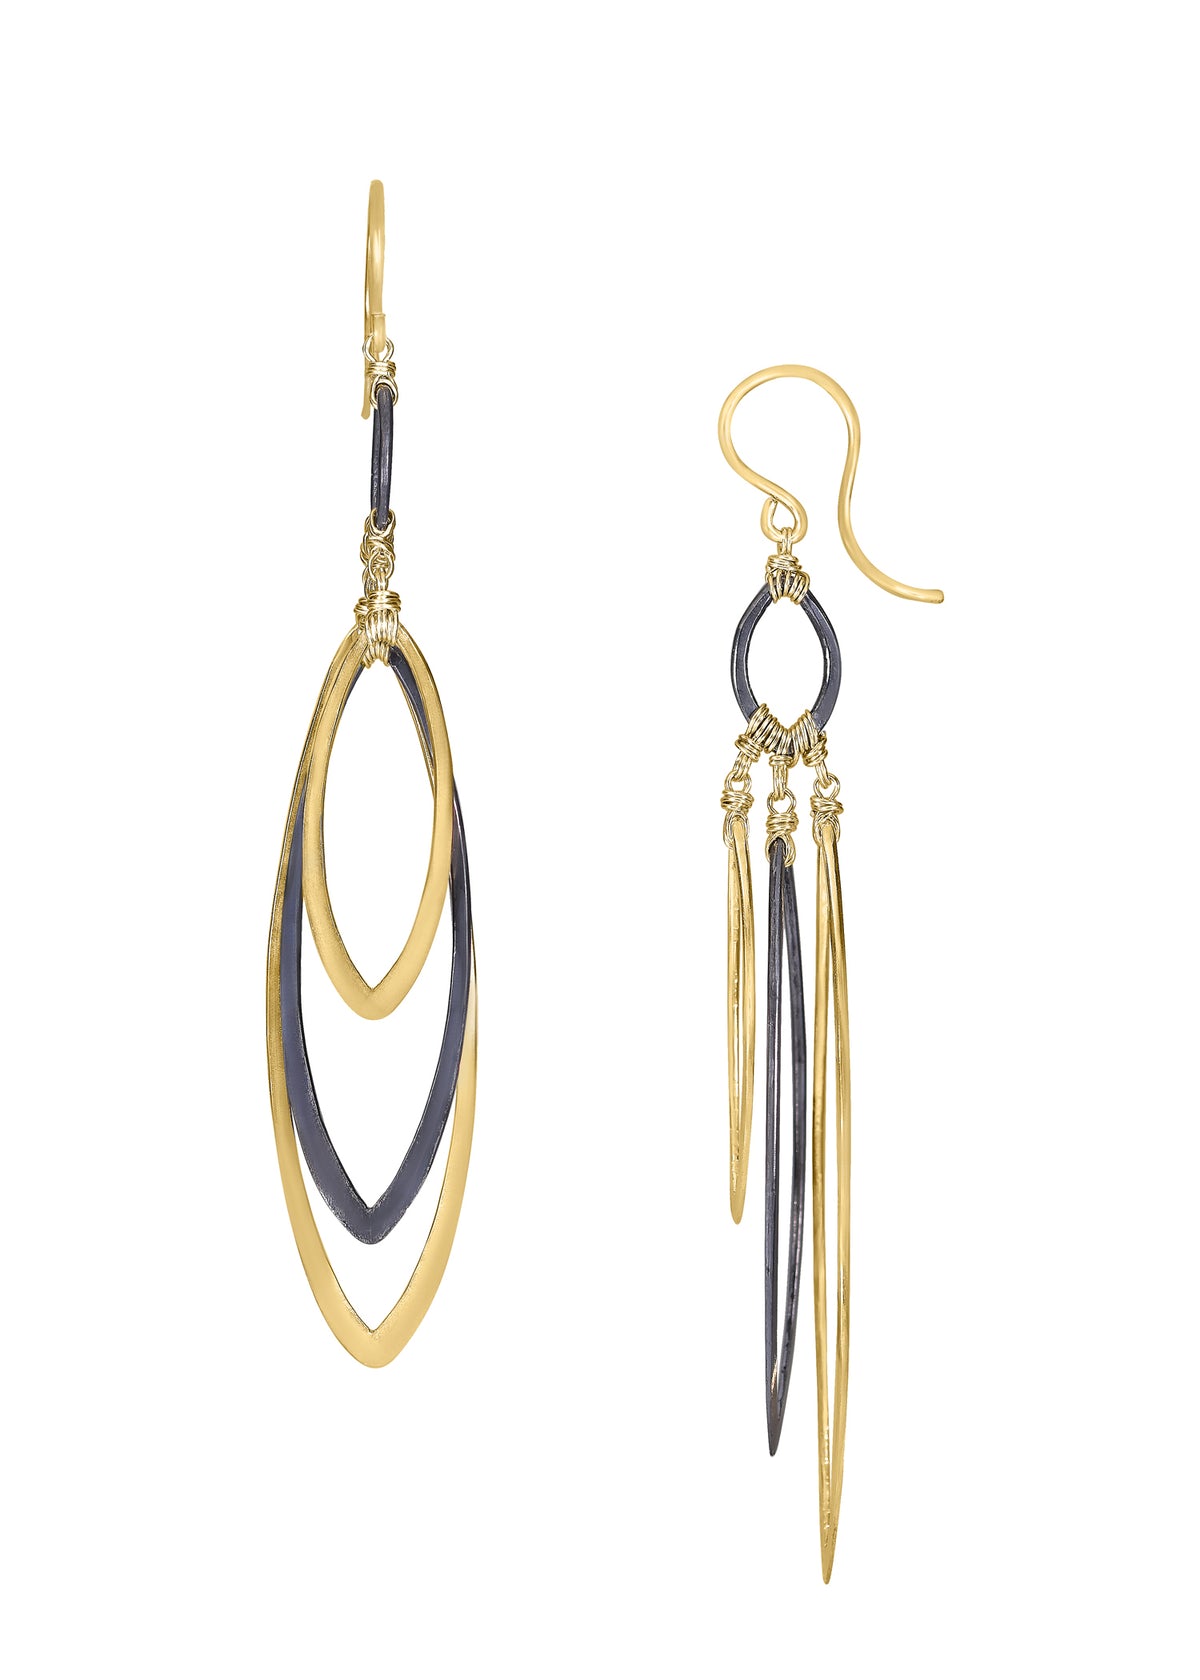 14k gold fill Blackened sterling silver Earrings measure 2-3/4&quot; in length (including the ear wires) and 1/2&quot; in width at the widest point Handmade in our Los Angeles studio